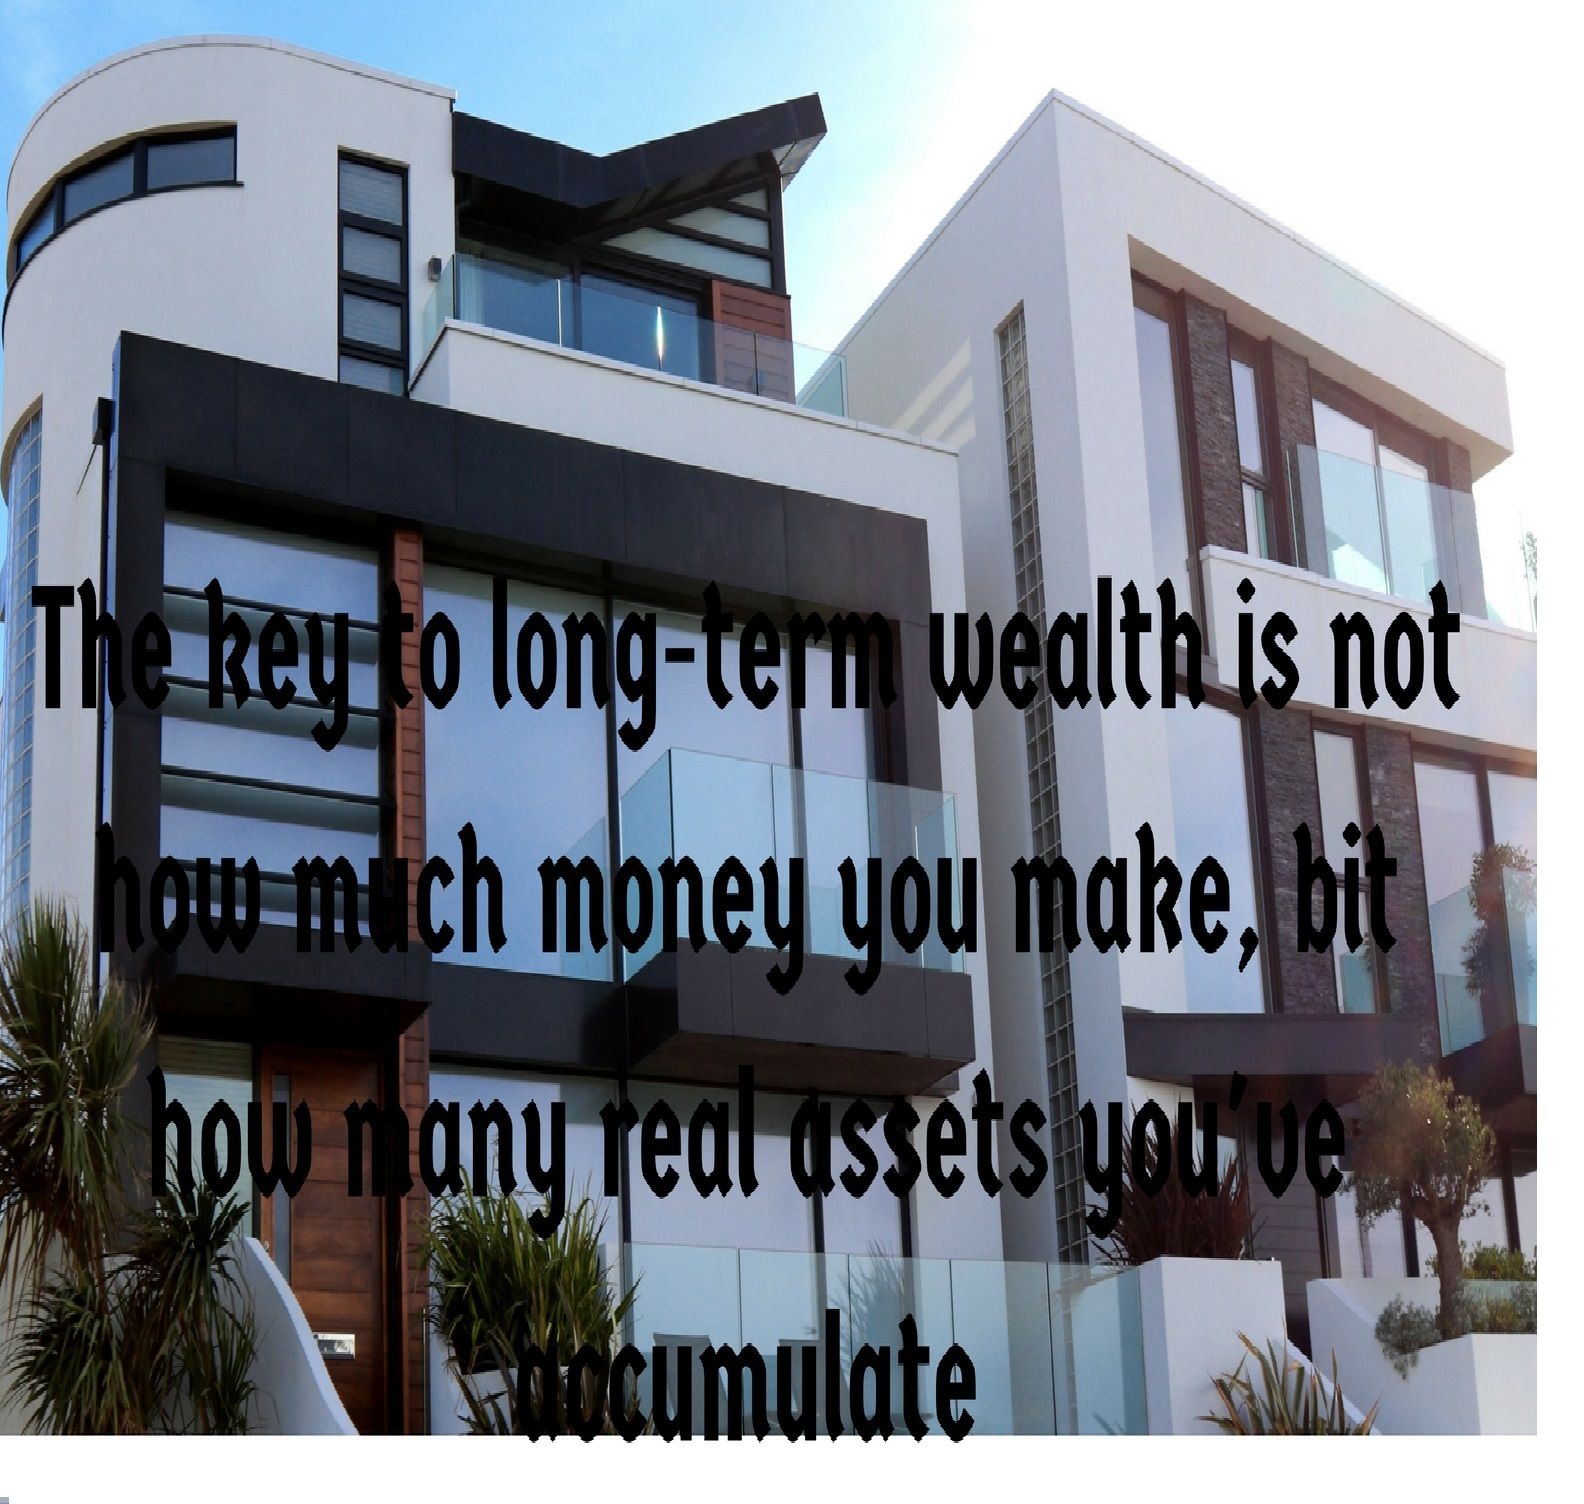 The key to long-term wealth is not how much money you make, but how many real assets you've accumulate.jpg